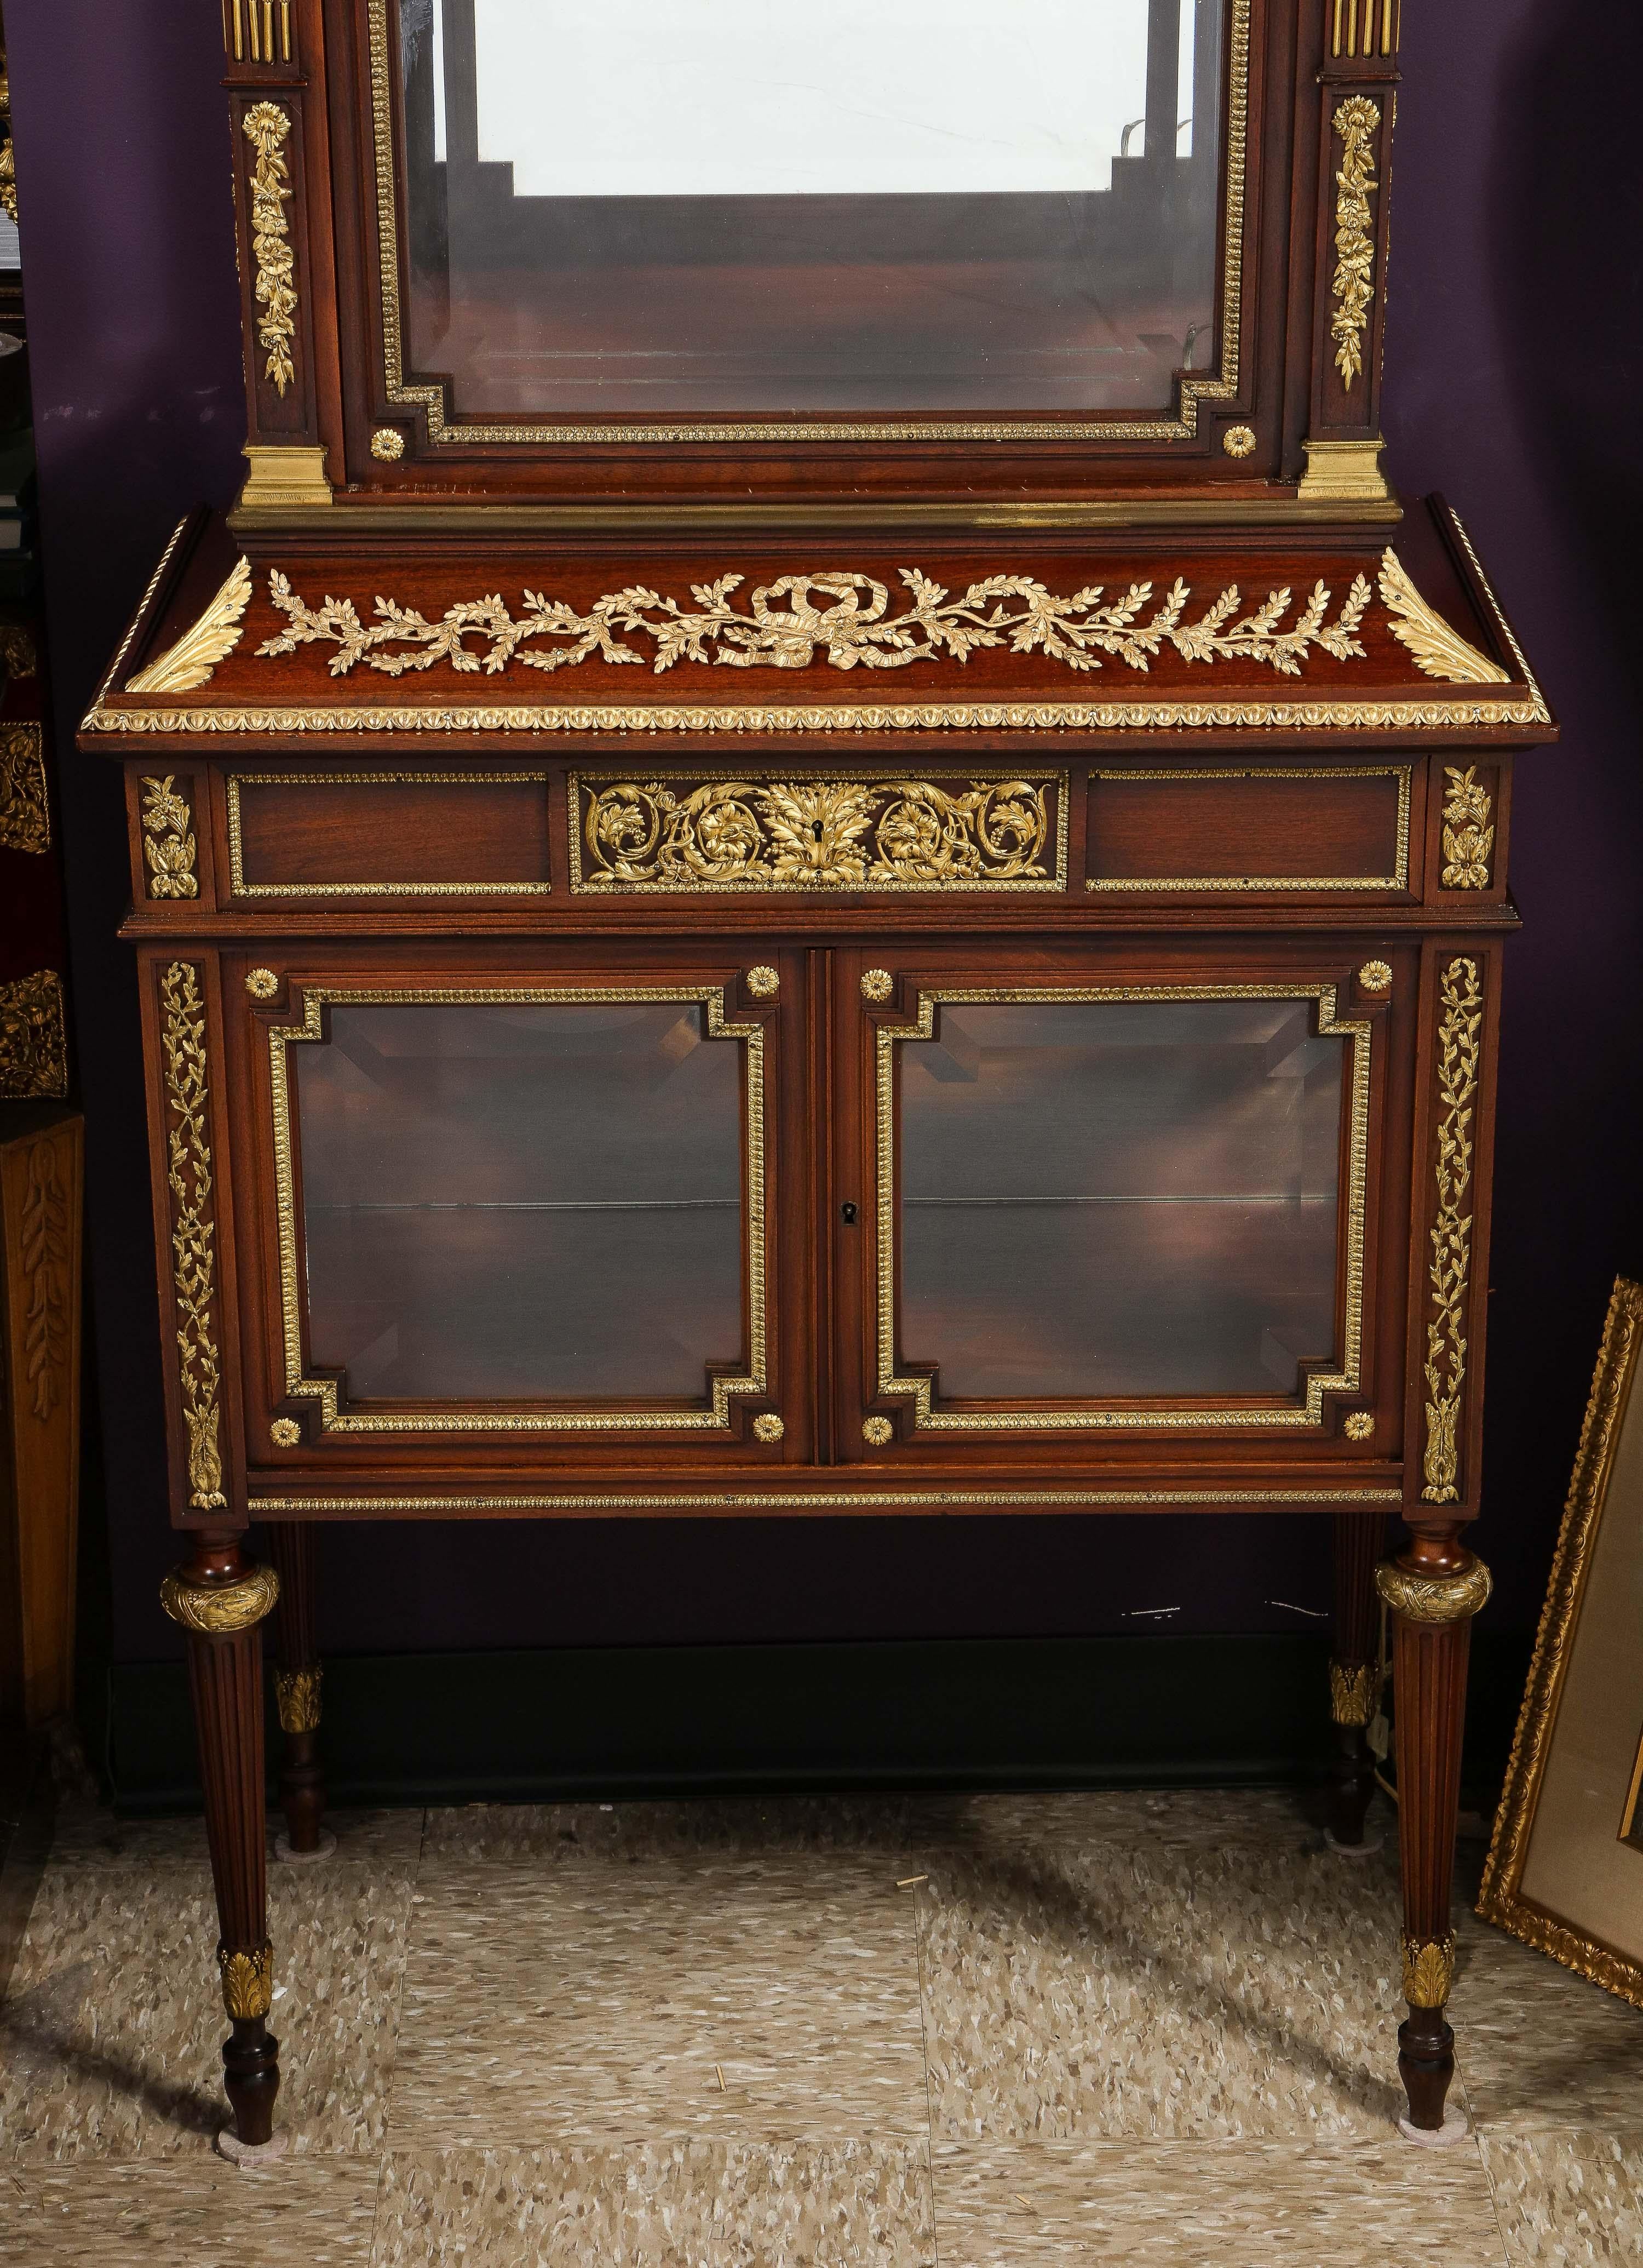 Exquisite French Ormolu-Mounted Mahogany and Glass Vitrine Cabinet For Sale 1